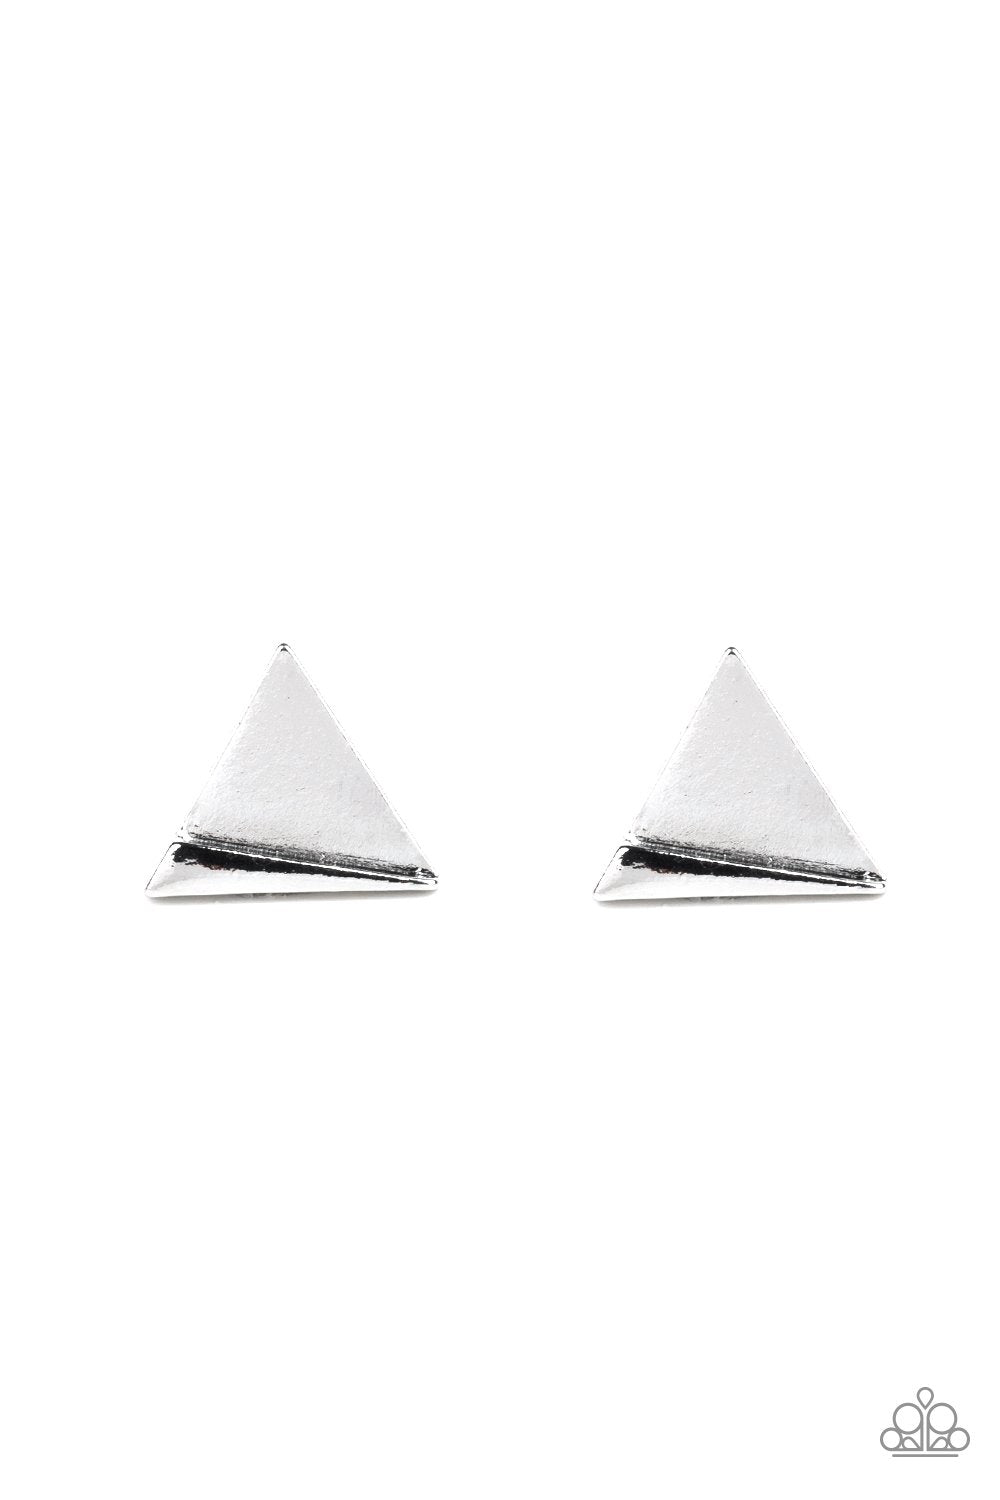 Die TRI-ing Silver Post Earrings - Paparazzi Accessories - lightbox -CarasShop.com - $5 Jewelry by Cara Jewels